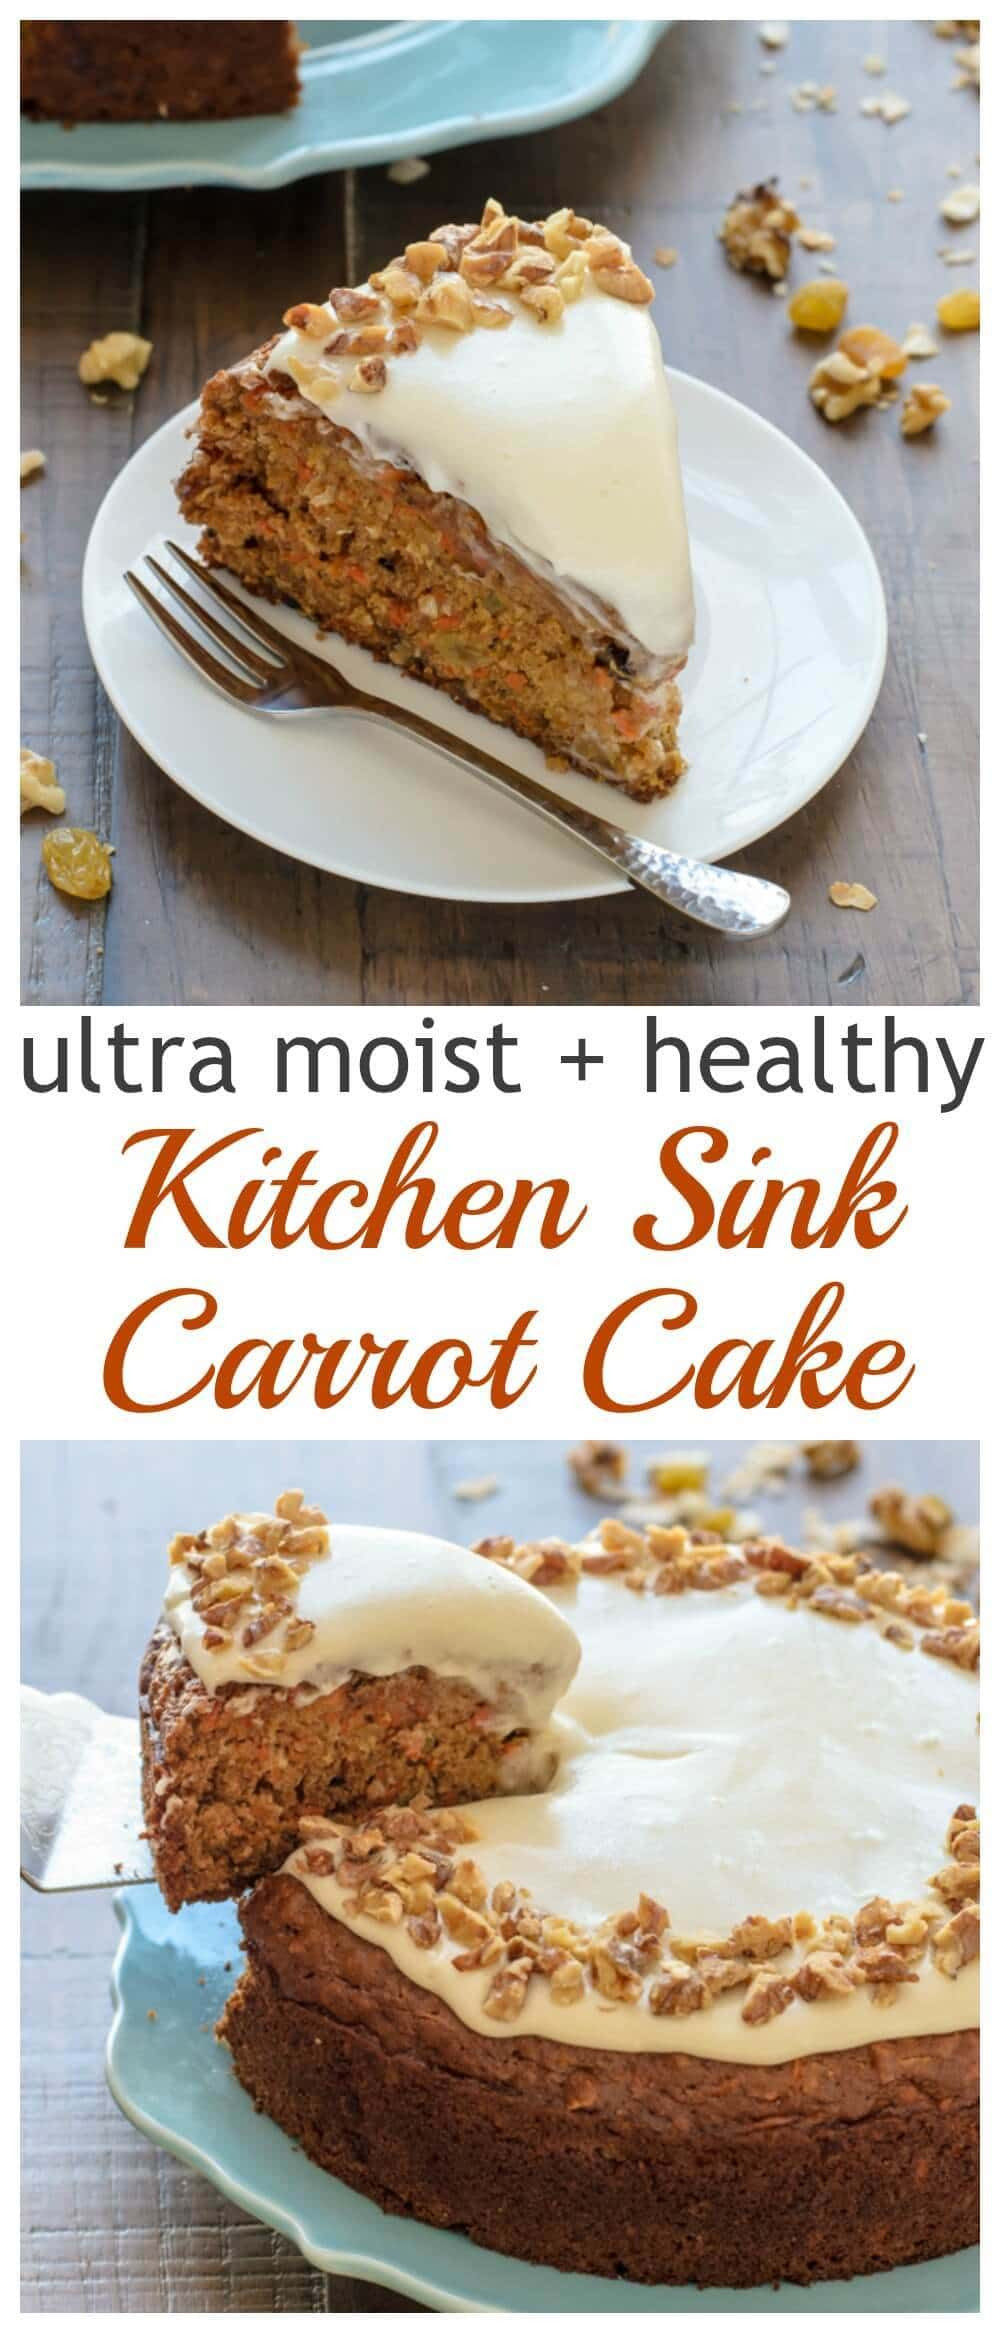 Healthy Moist Carrot Cake Recipe
 Healthy Carrot Cake with Light Cream Cheese Frosting